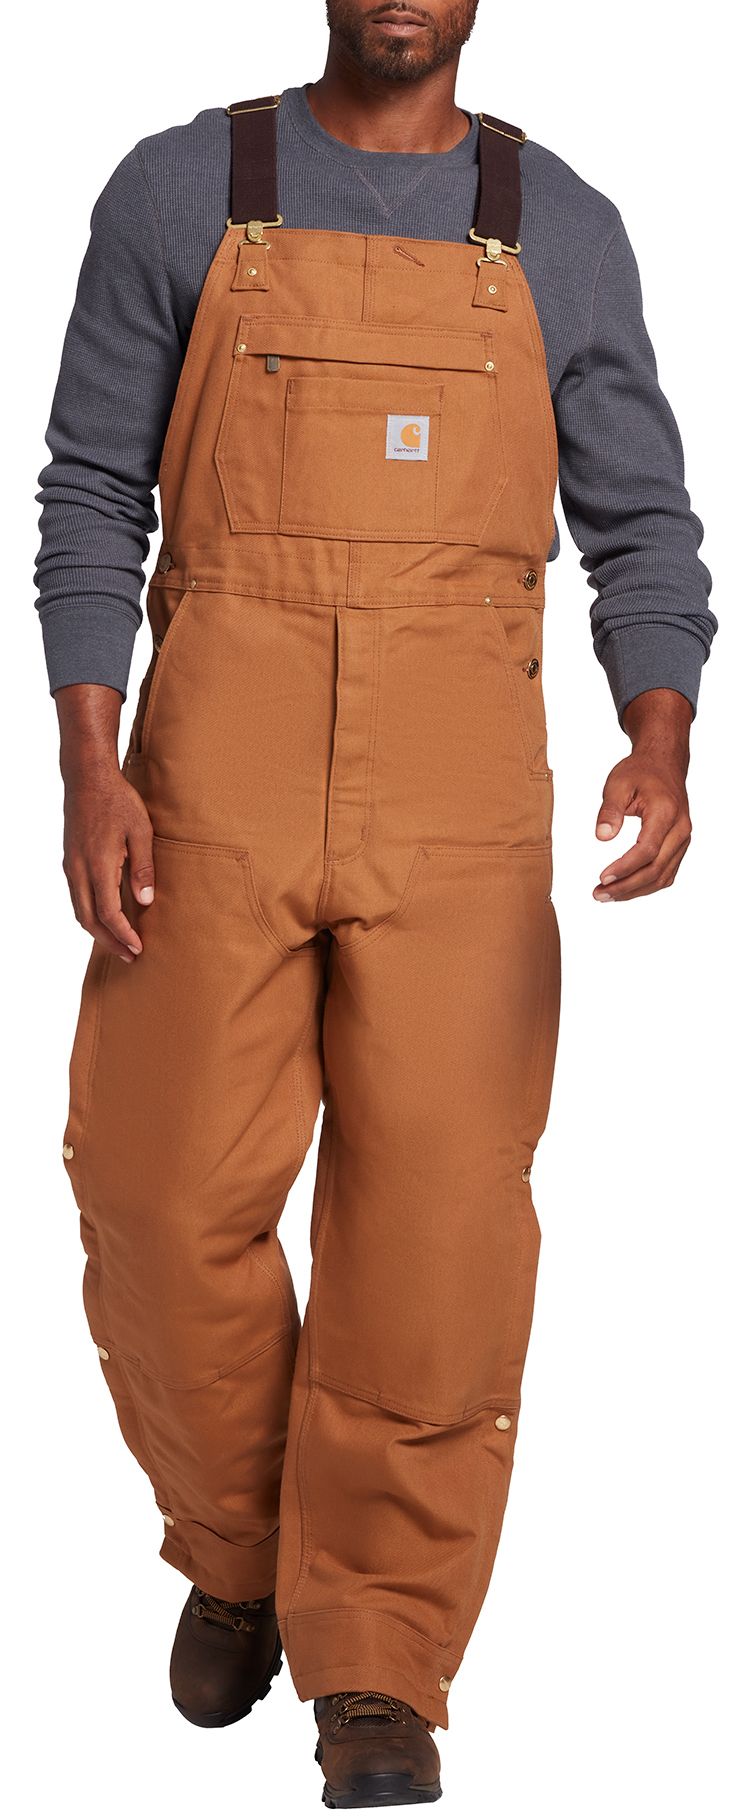 Photos - Ski Wear Carhartt Men's Loose Fit Firm Duck Insulated Bib Overalls, Large, 